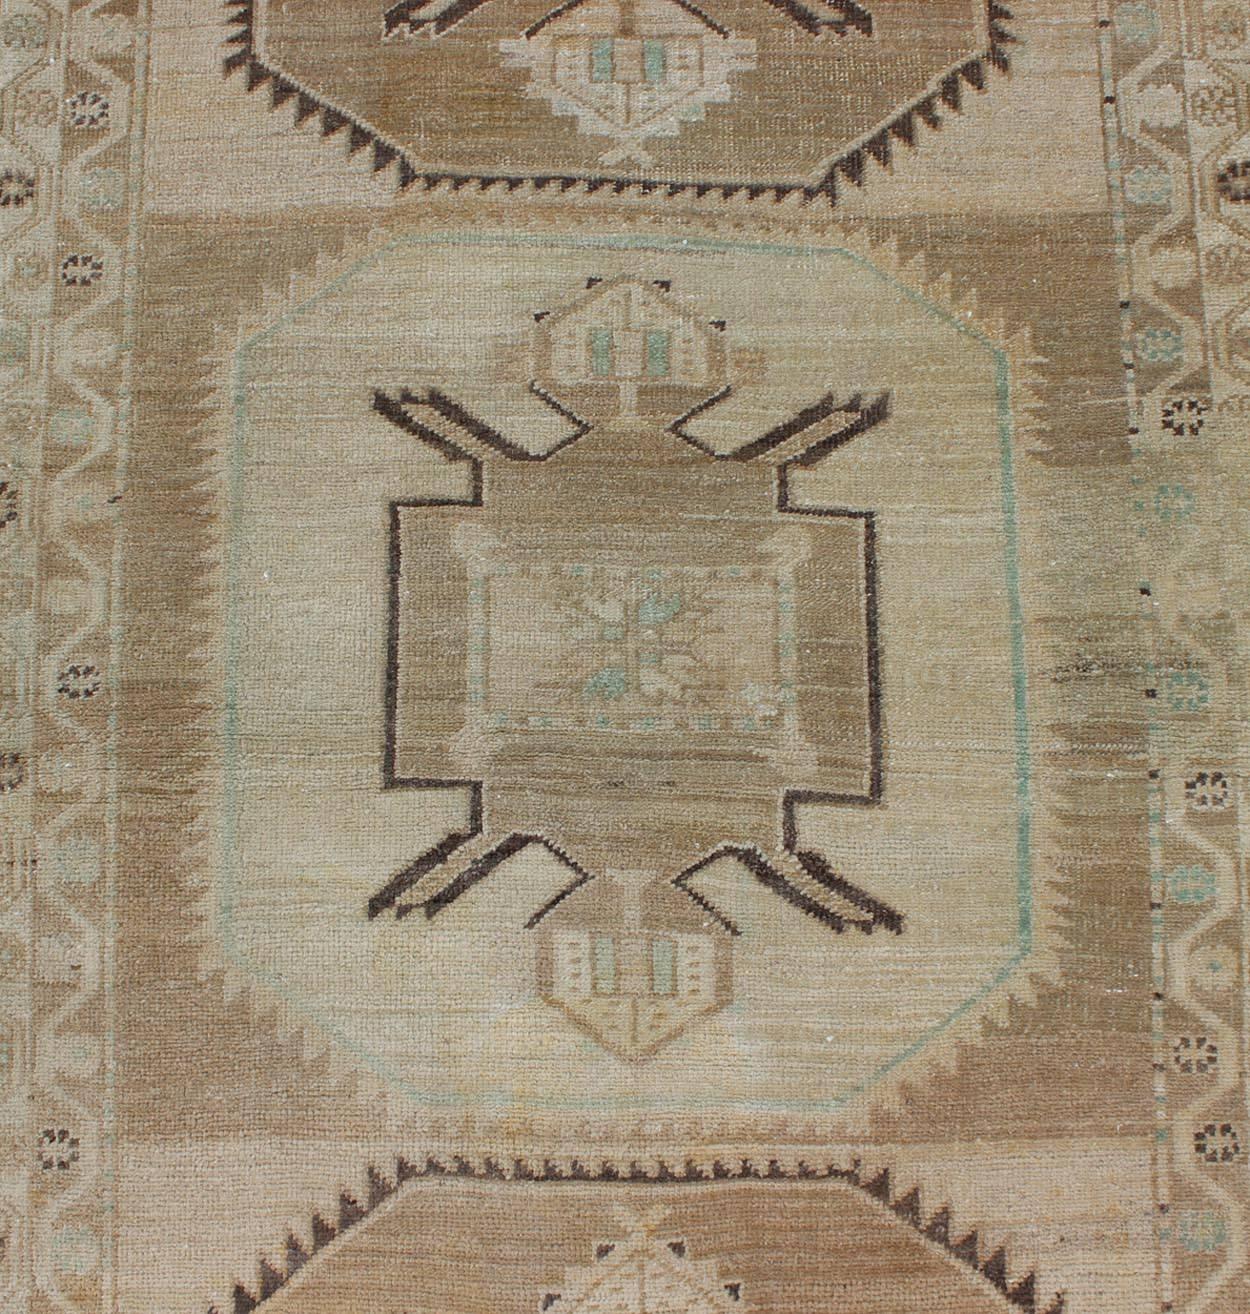 20th Century Oushak Runner with Geometric Design in Neutral Colors